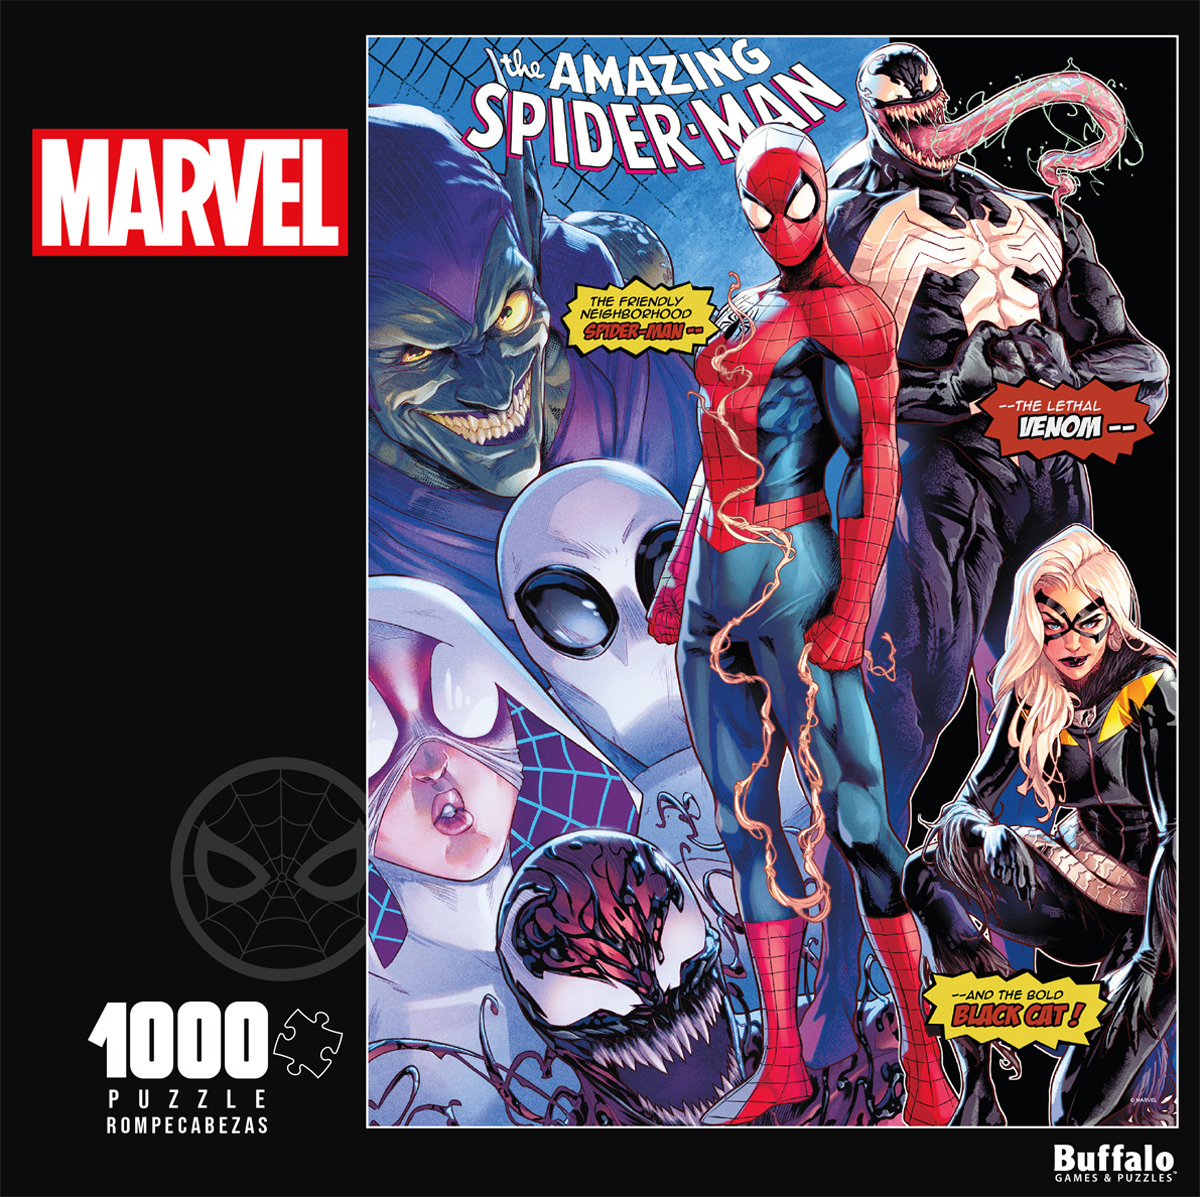 The Amazing Spider-Man Legacy #802